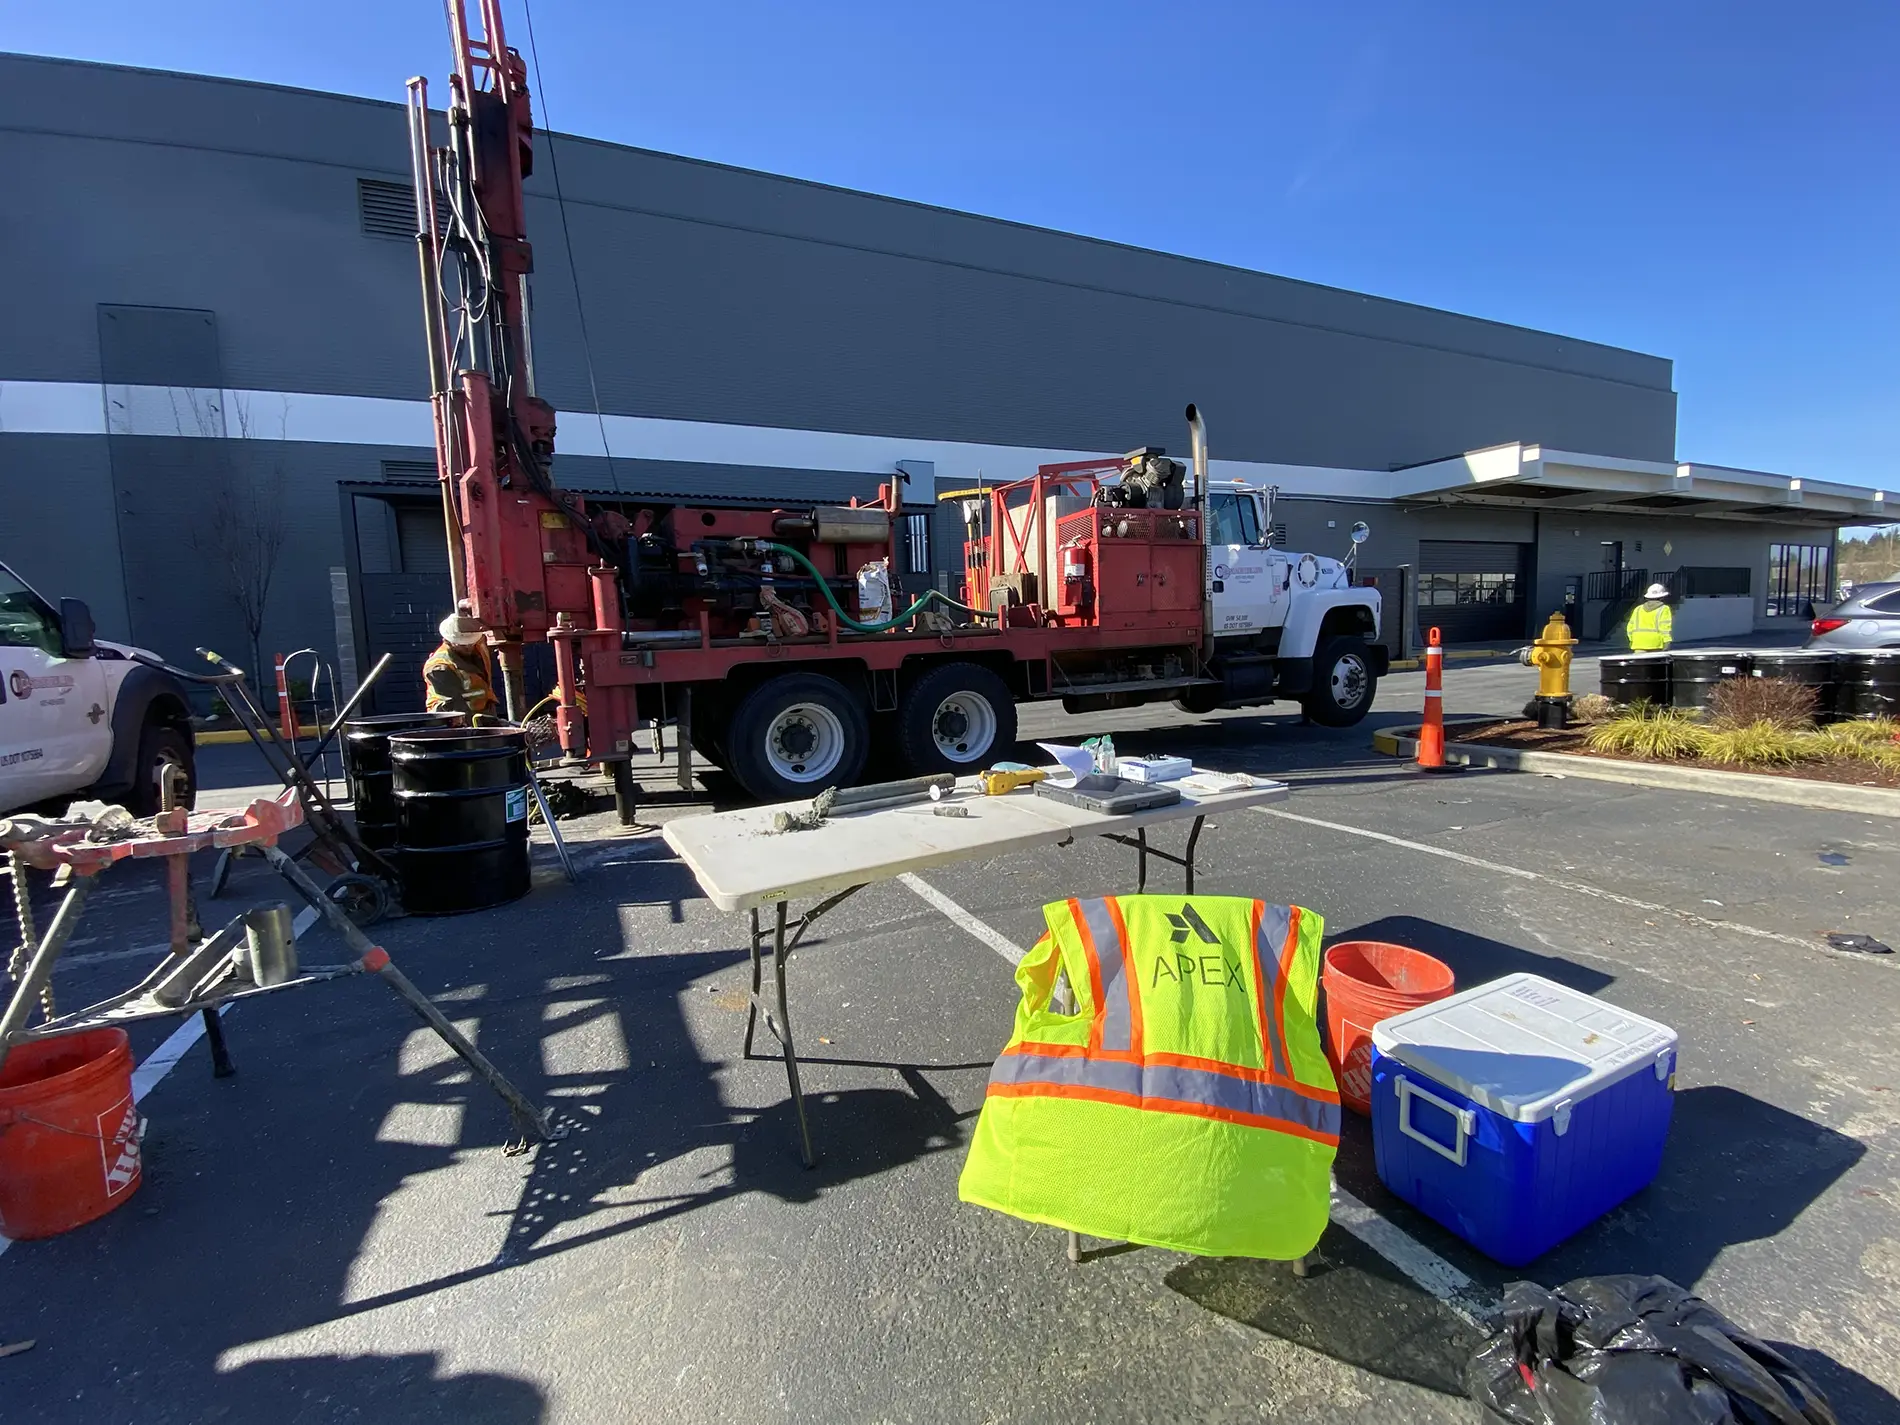 Apex employees operating vapor monitoring point boring machinery during a vapor intrusion investigation, one of the environmental services performed for a retail center expansion in the Puget Sound Region of Washington.